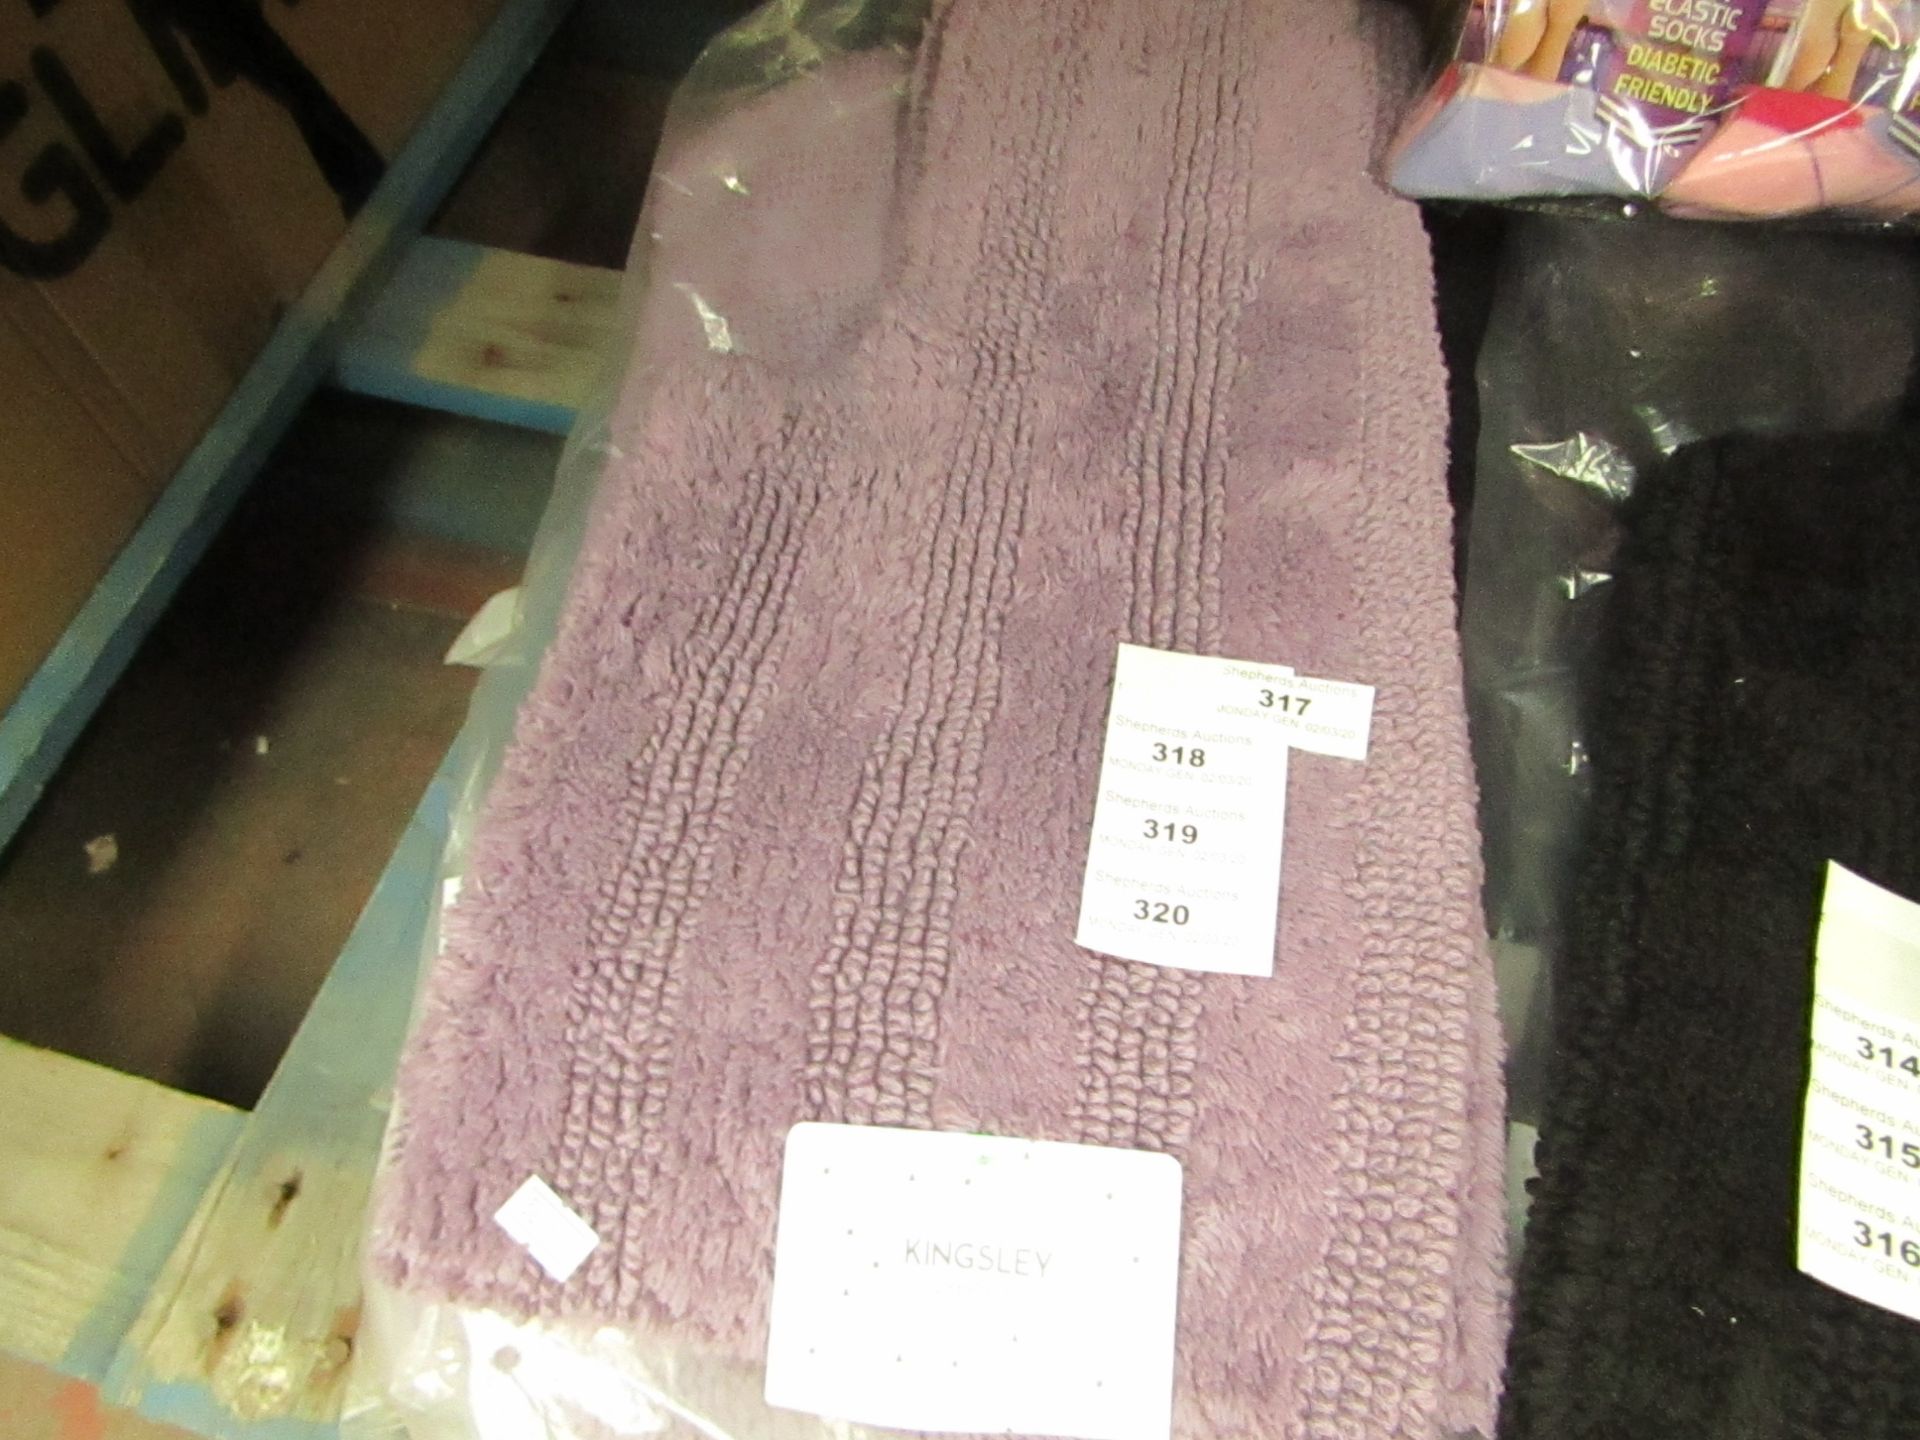 2 x Kingsley Pedastal mats in Lilac. New & Packaged